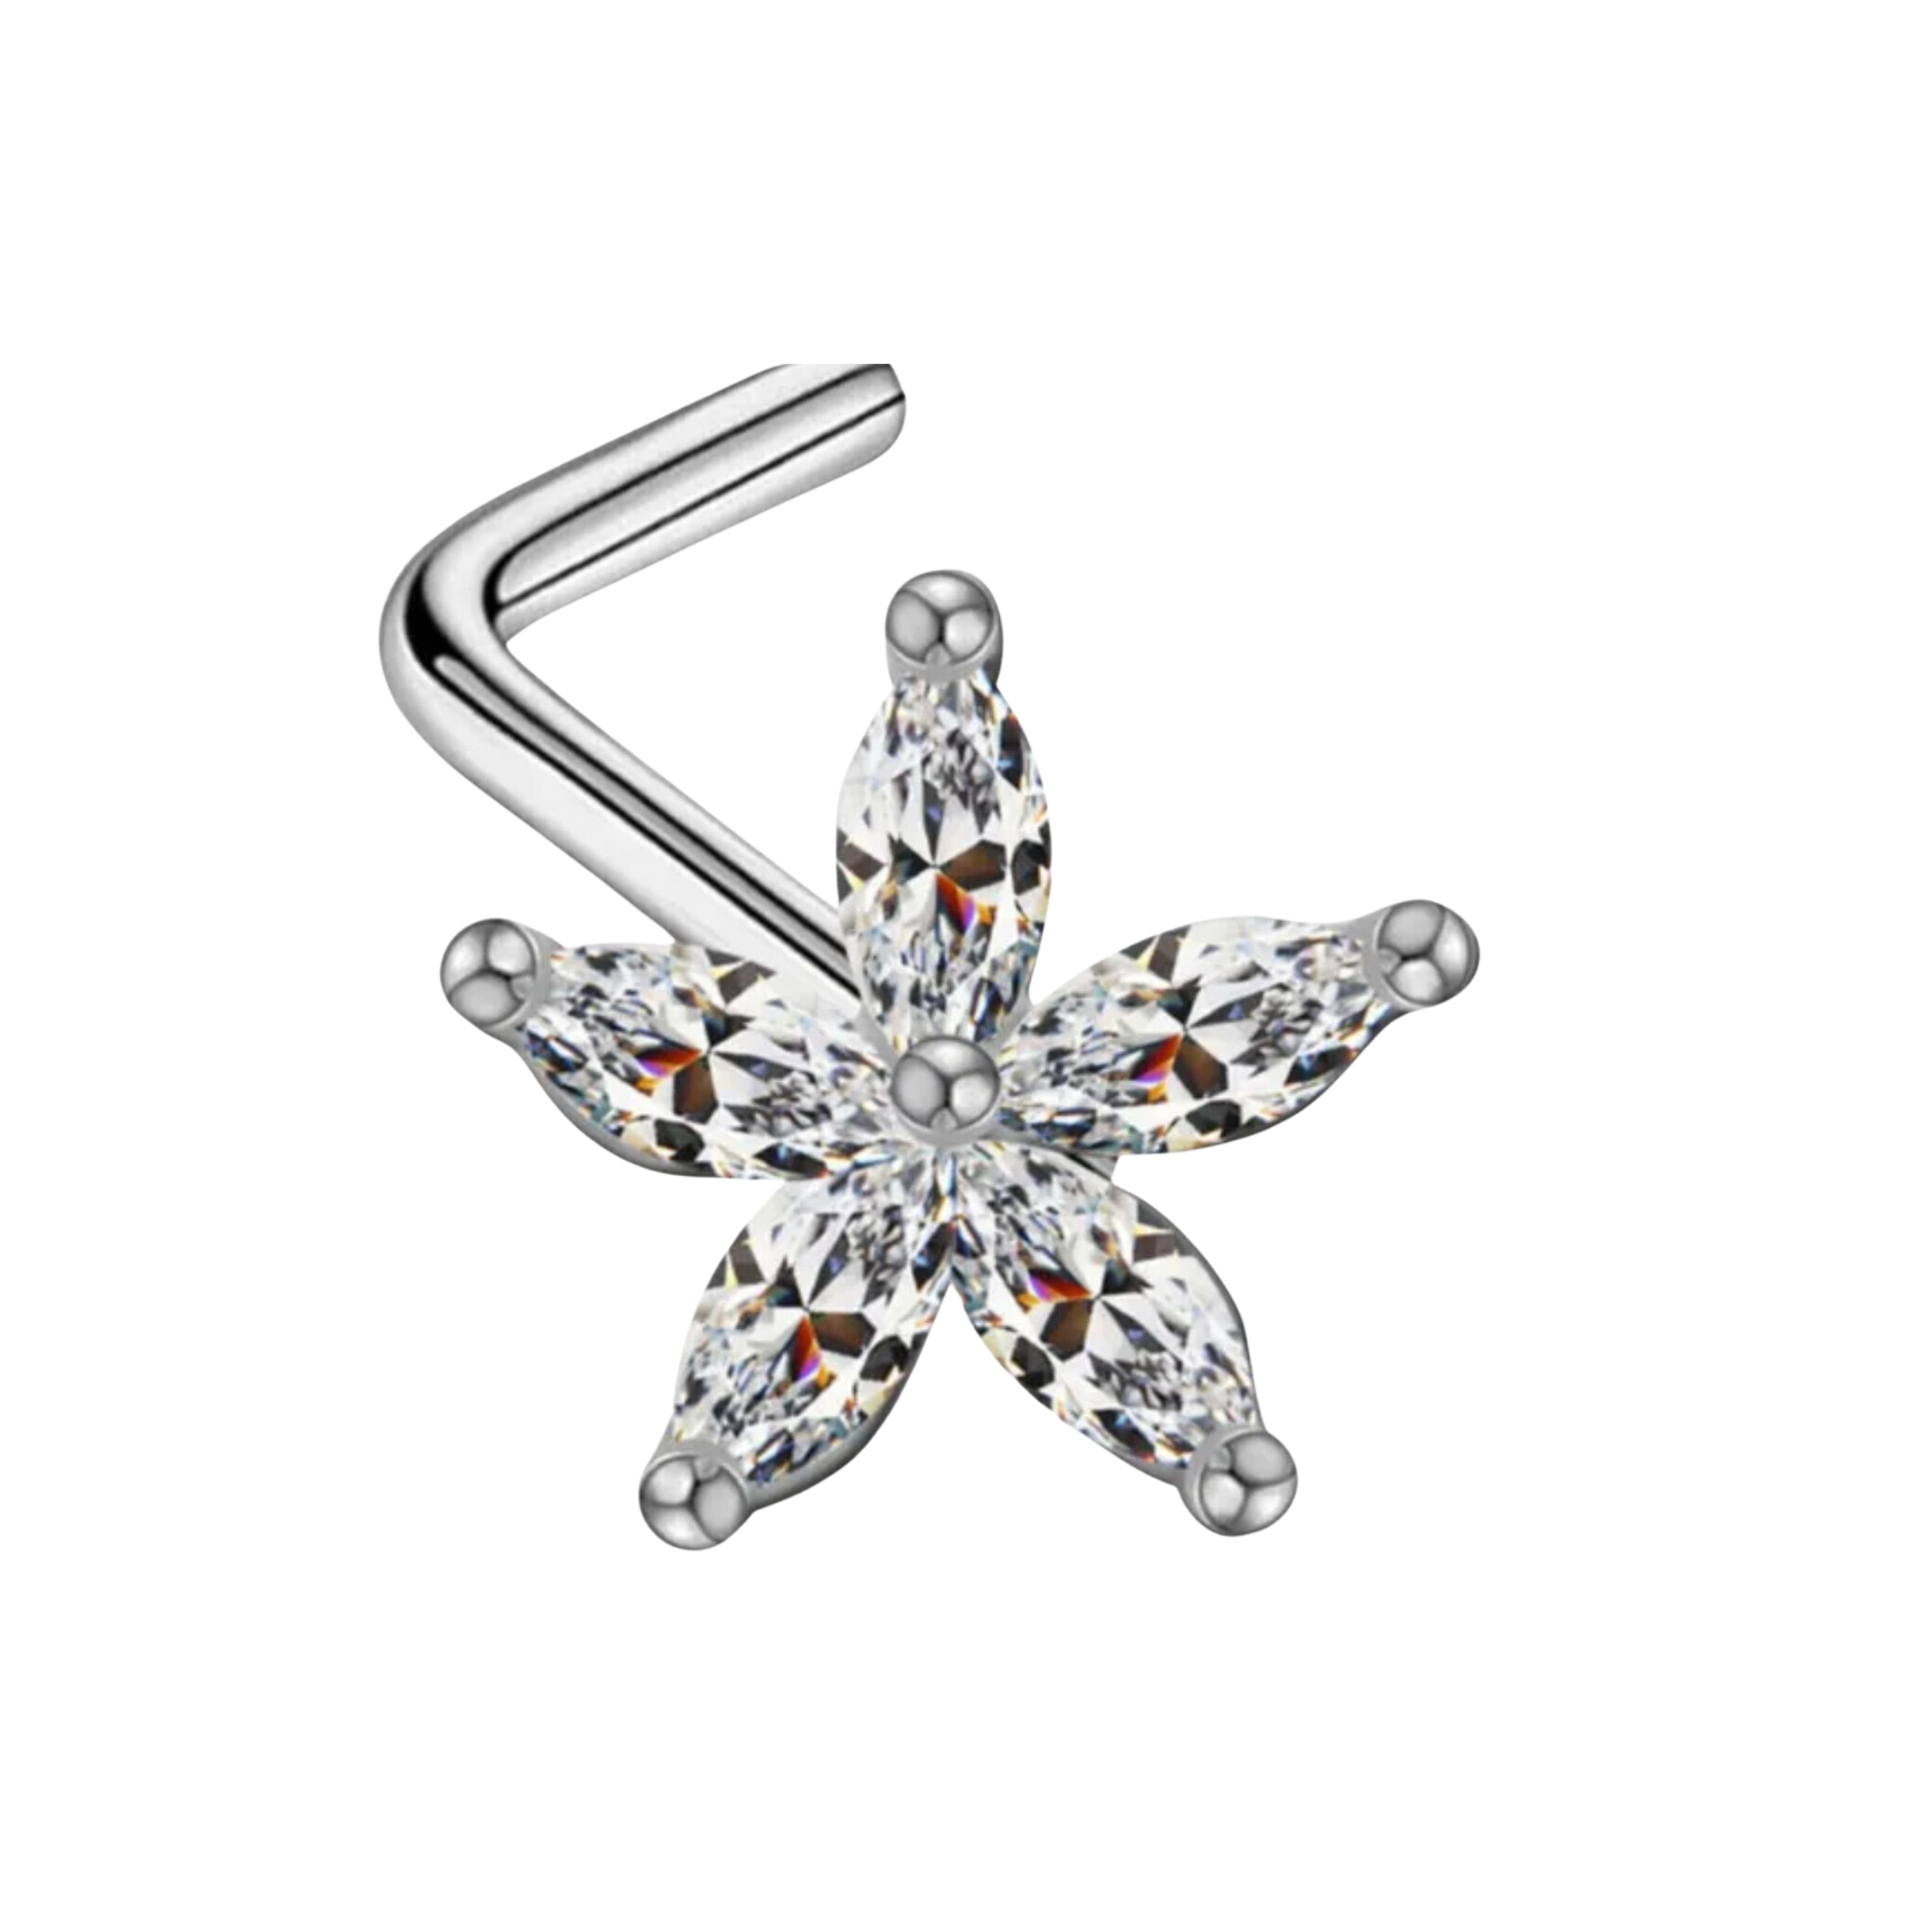 Crystal Flower Nose Stud Piercing Jewelry at MyBodiArt